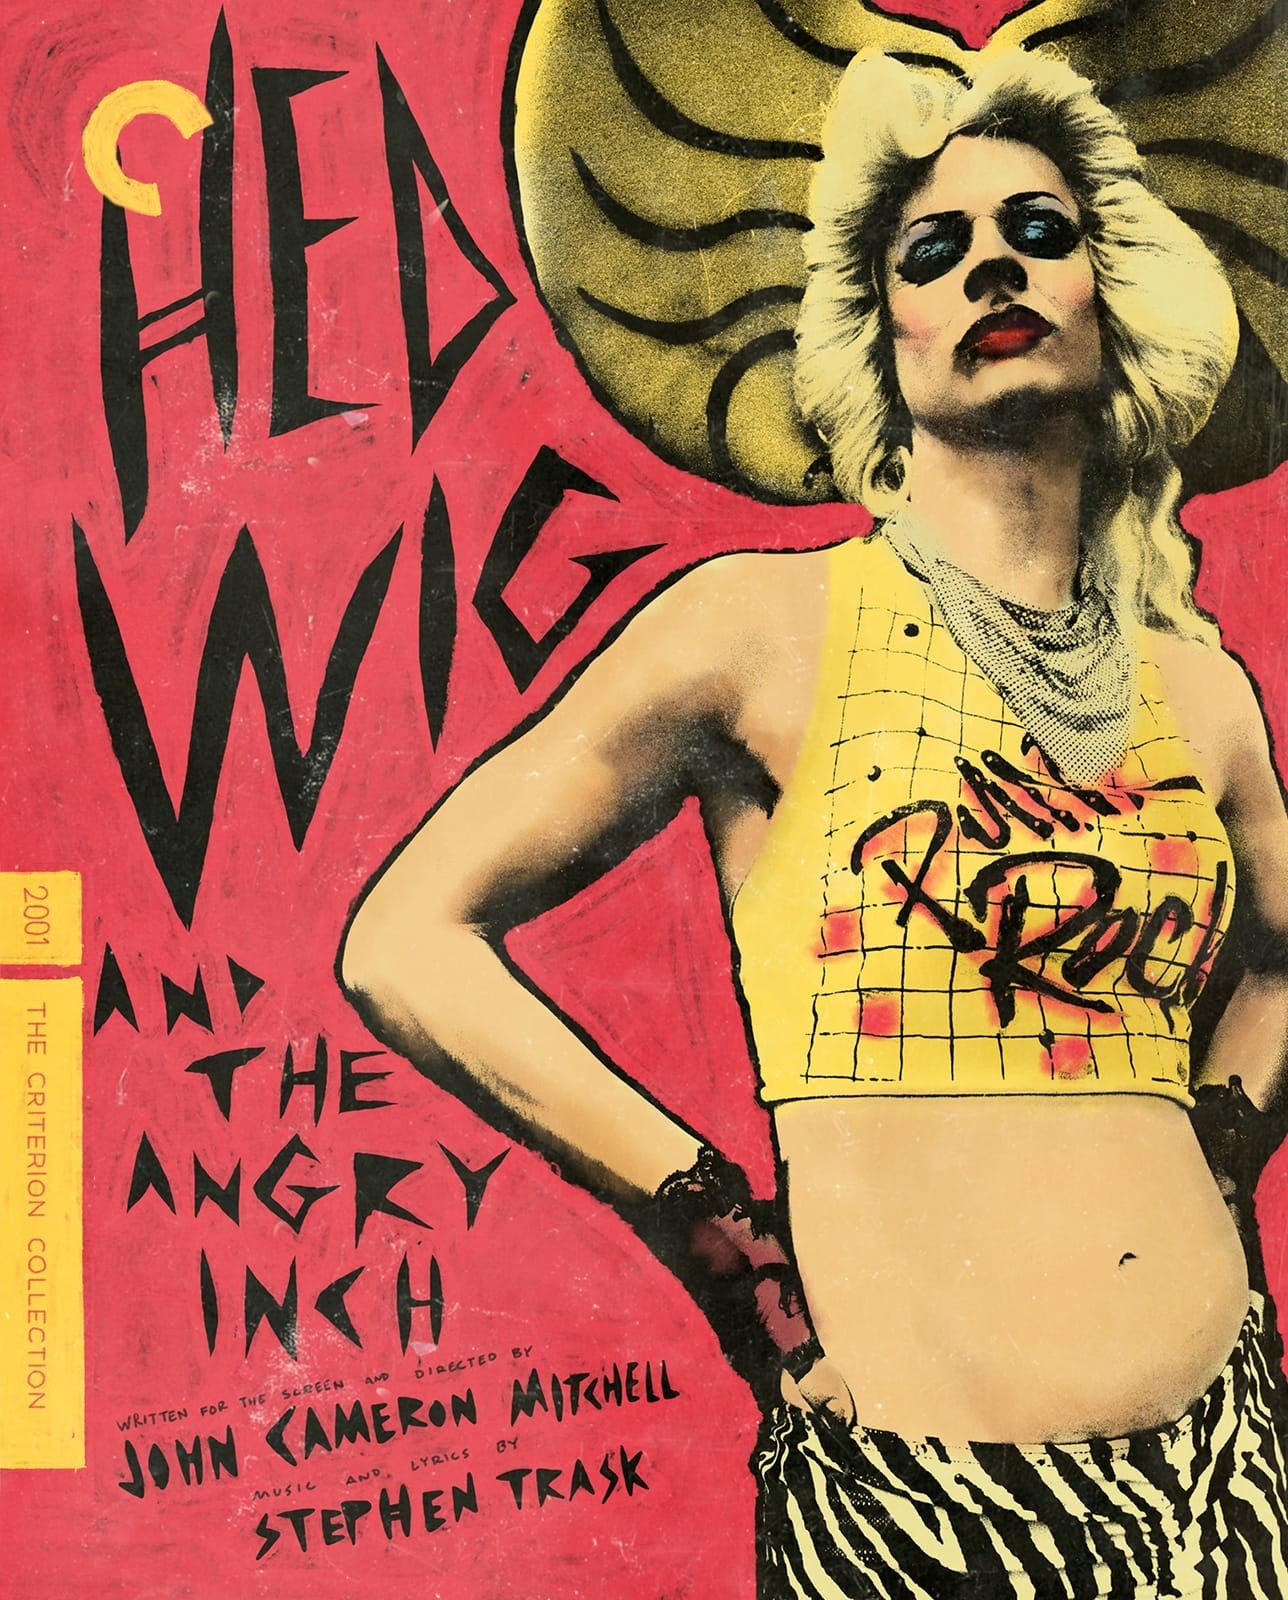 Hedwig And The Angry Inch - Criterion Collection (Blu-ray)